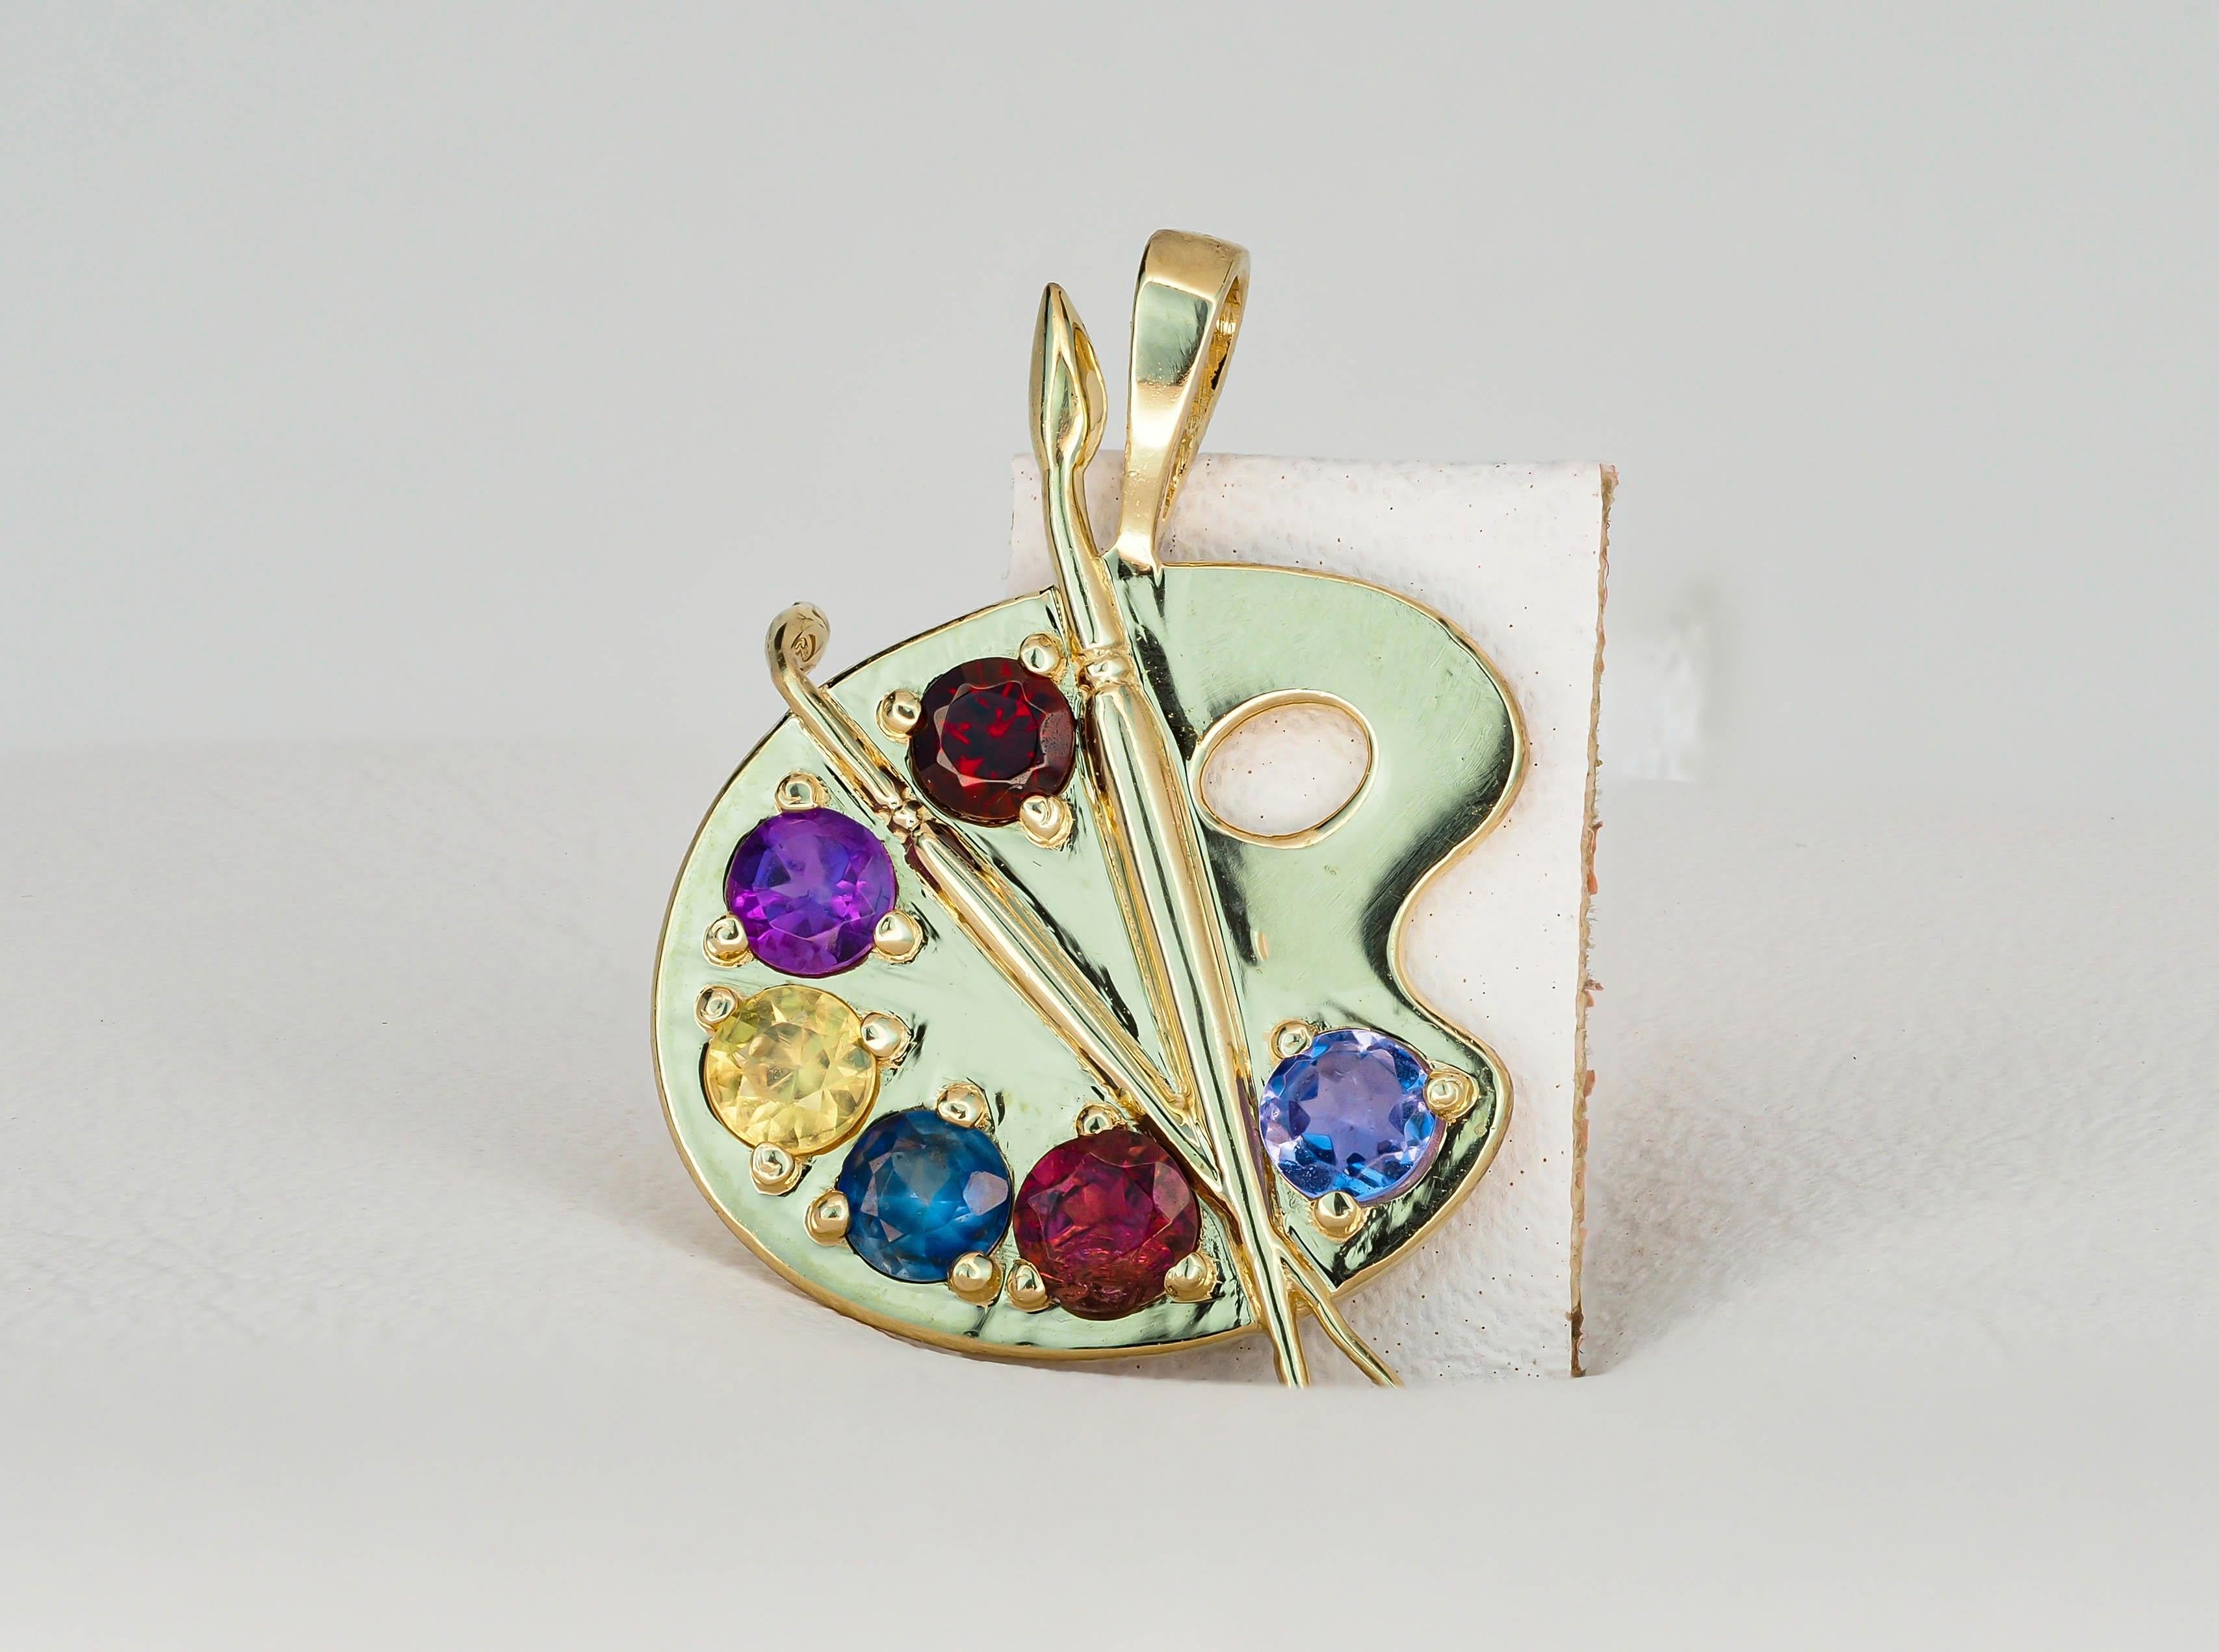 Modern Palette with Paints 14k Gold Pendant with Colored Stones For Sale